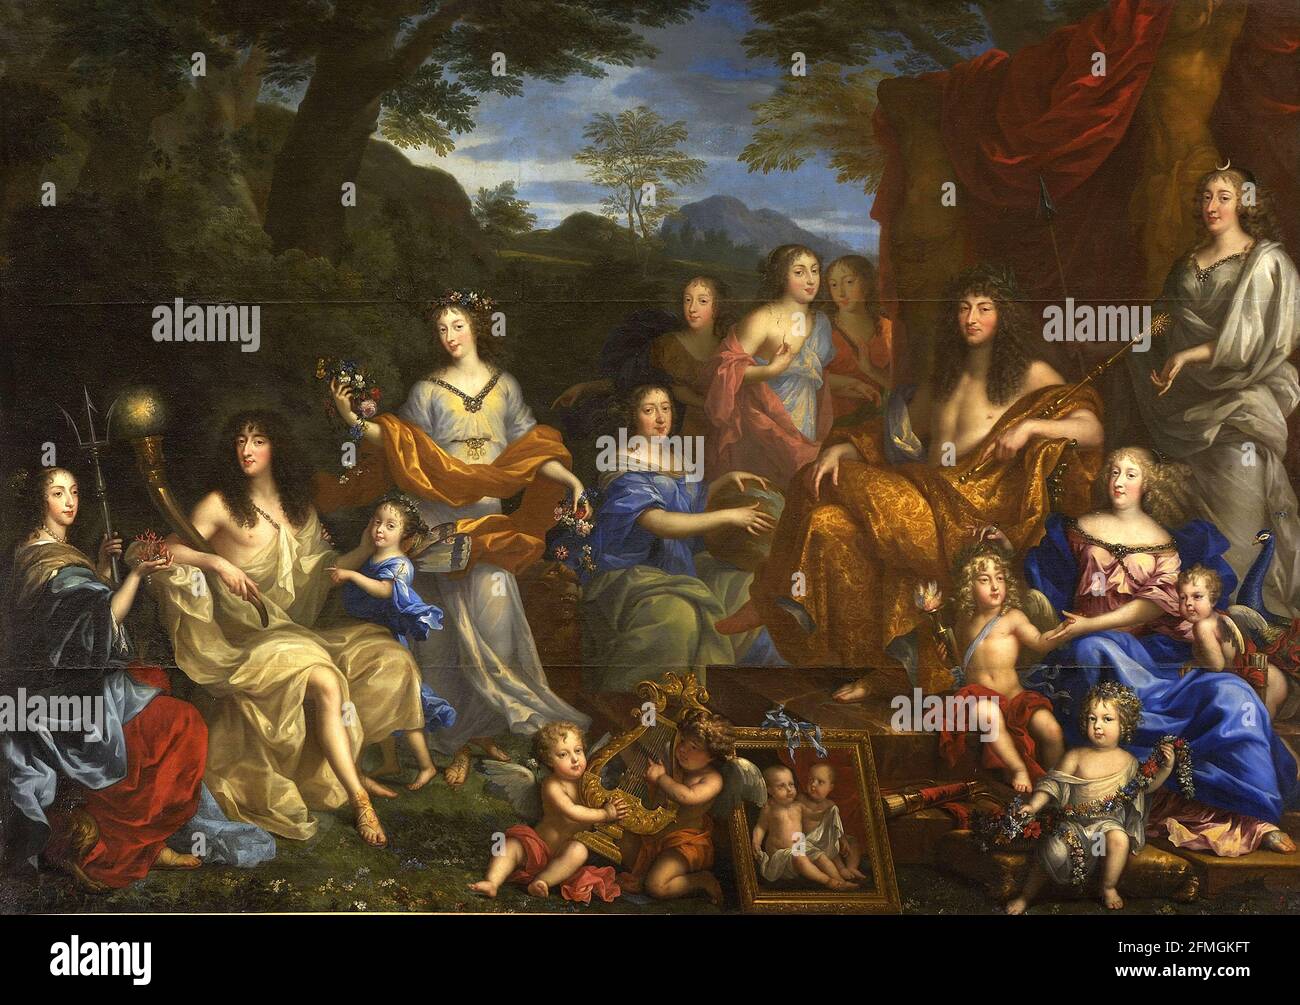 Jean Nocret  - Louis XIV and Royal Family - From Right - Henrietta Maria of France, Queen of England; Duke Filippo d'Orléans (Monsieur); his daughter Maria Luisa d'Orléans; his wife Henrietta Anna Stuart, Duchess of Orleans and Princess of England; Queen Mother Anne of Austria; in the picture the deceased sons of the king; King Louis XIV; the dolphin Luigi; Queen Maria Theresa of Spain; Anna Maria Luisa d'Orléans (the Great Mademoiselle) Stock Photo